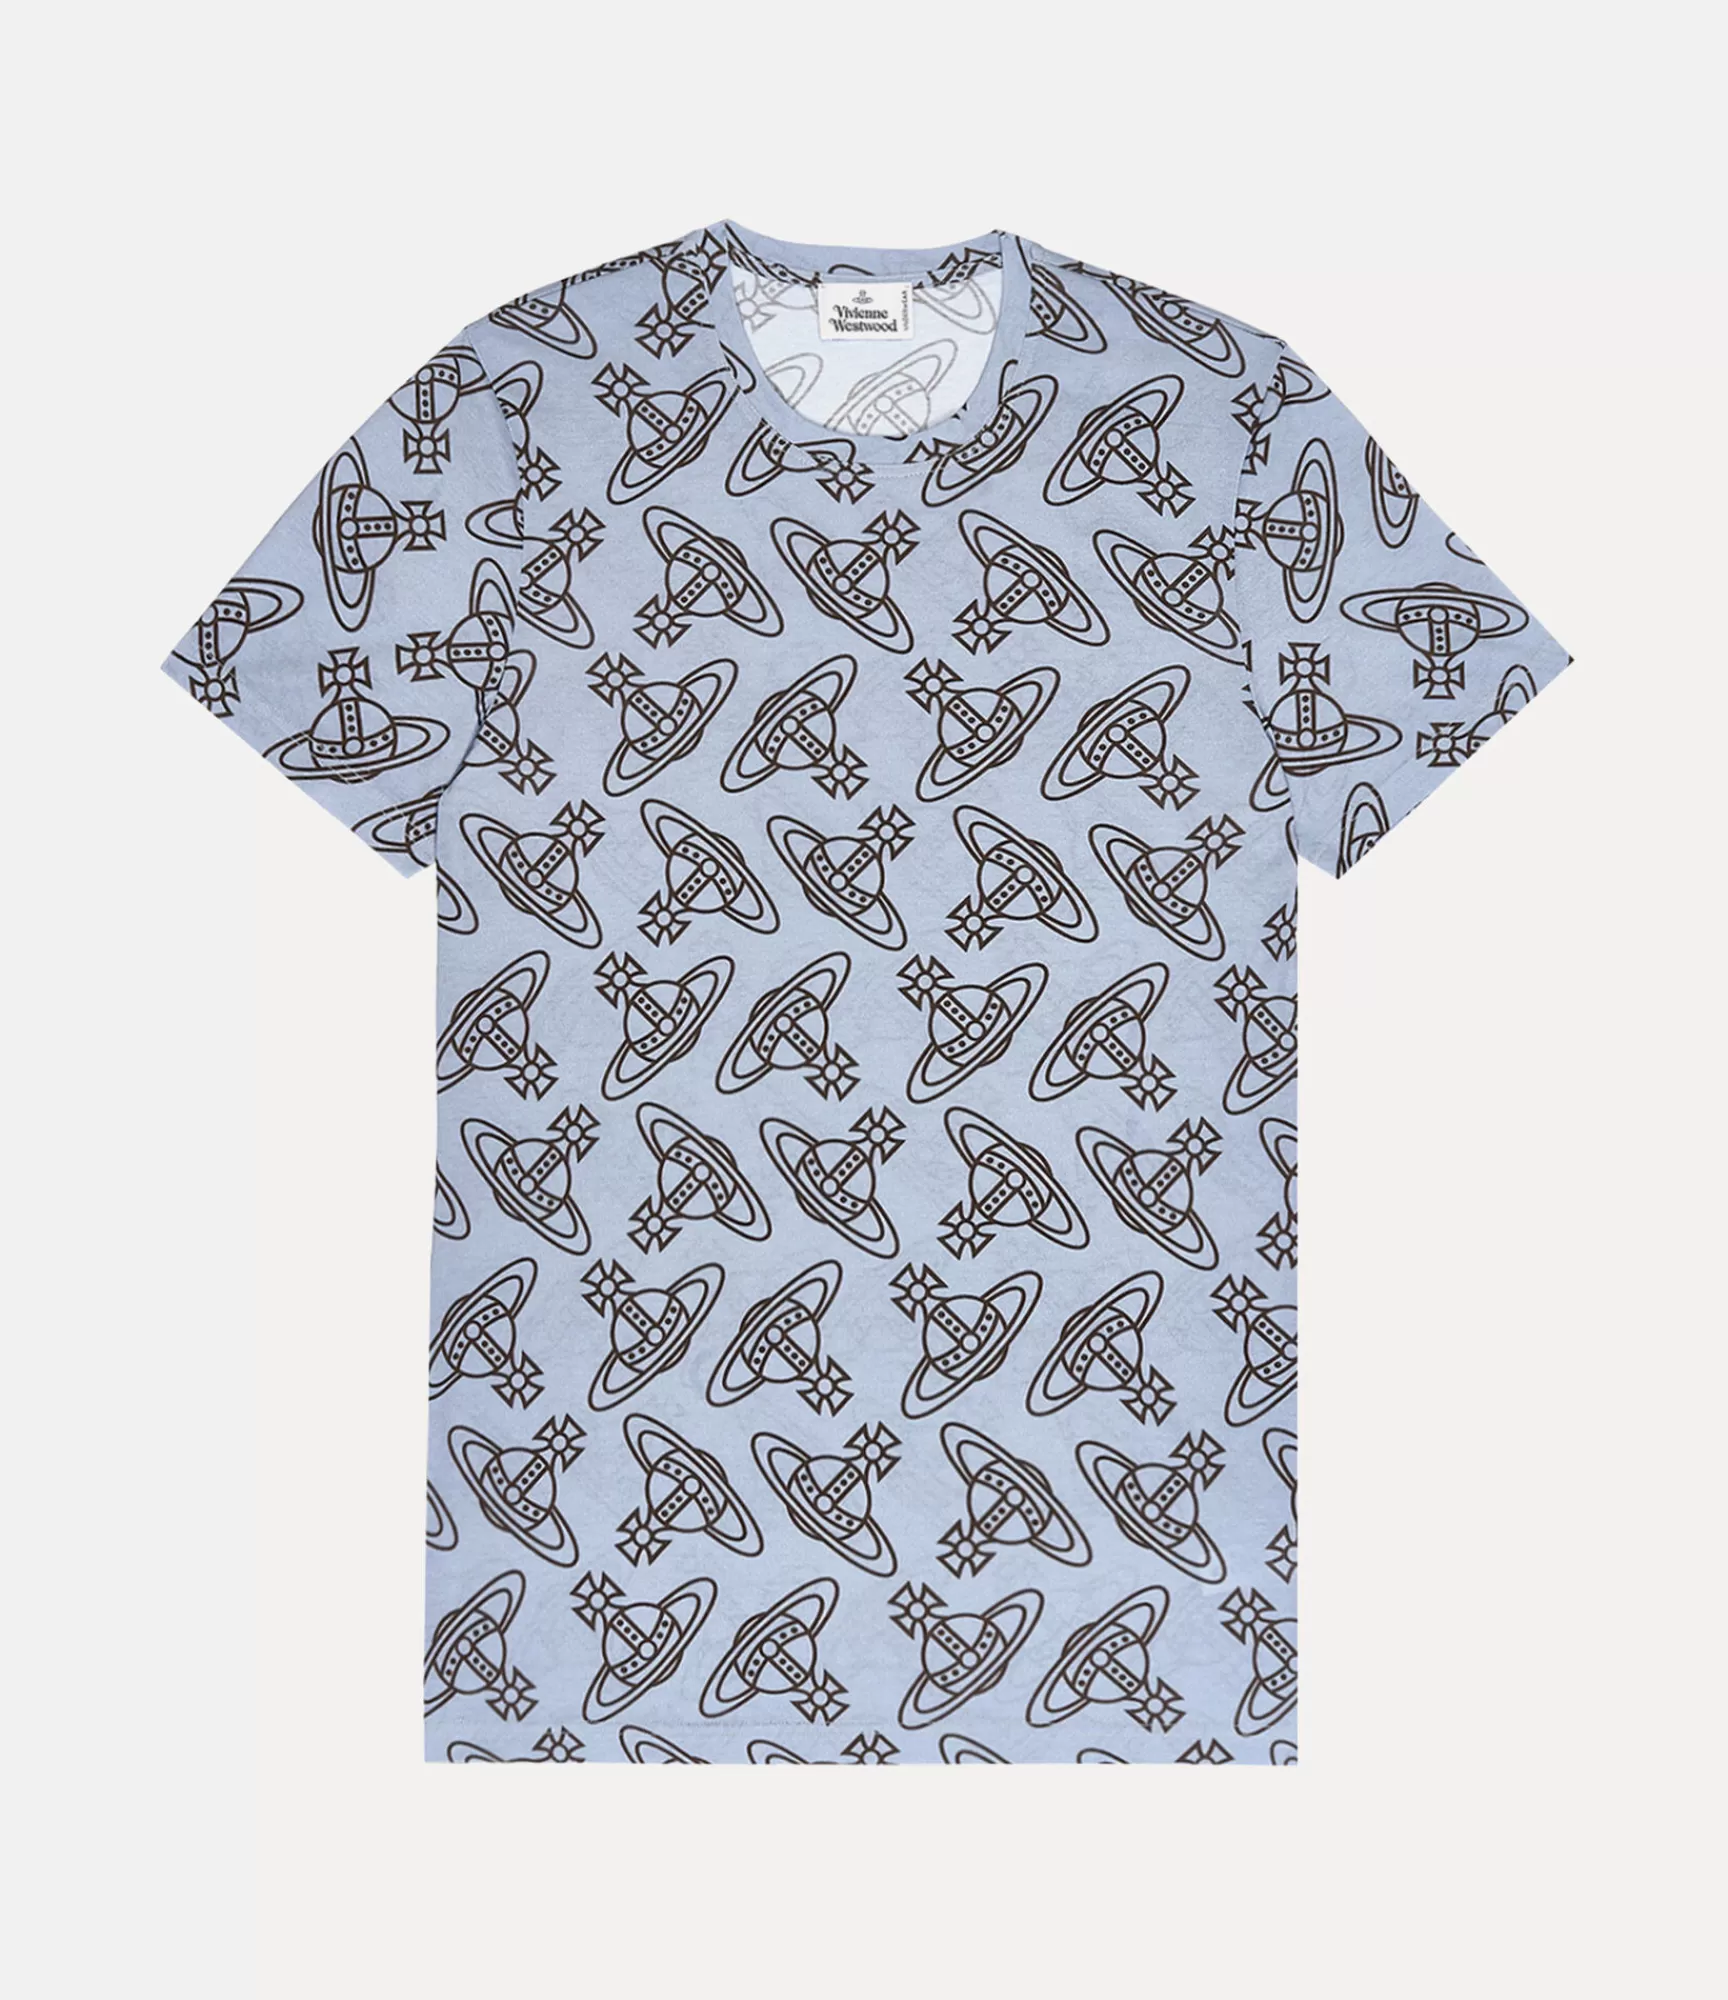 Vivienne Westwood T-Shirts and Polos | Sweatshirts and T-Shirts*Orb allover undershirt Grey